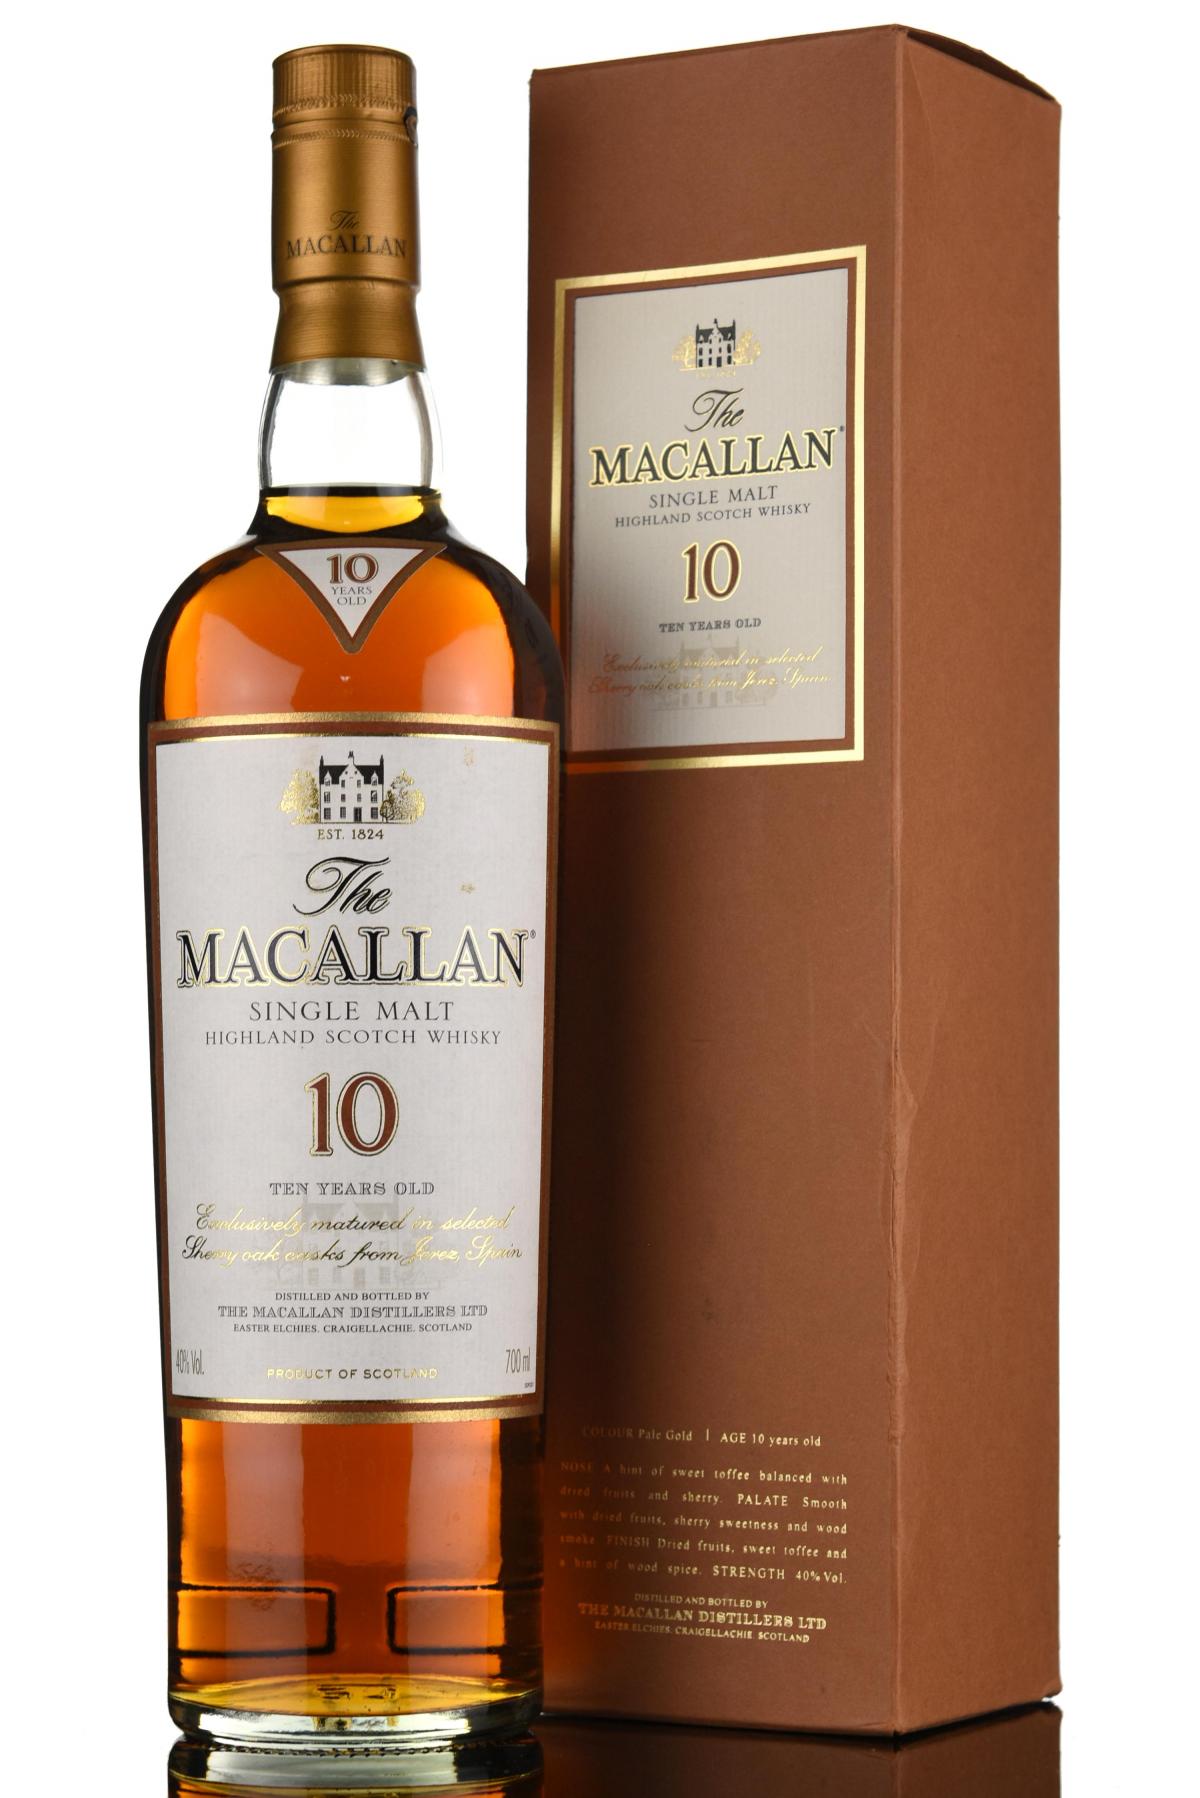 Macallan 10 Year Old - Sherry Casks - Mid 2000s